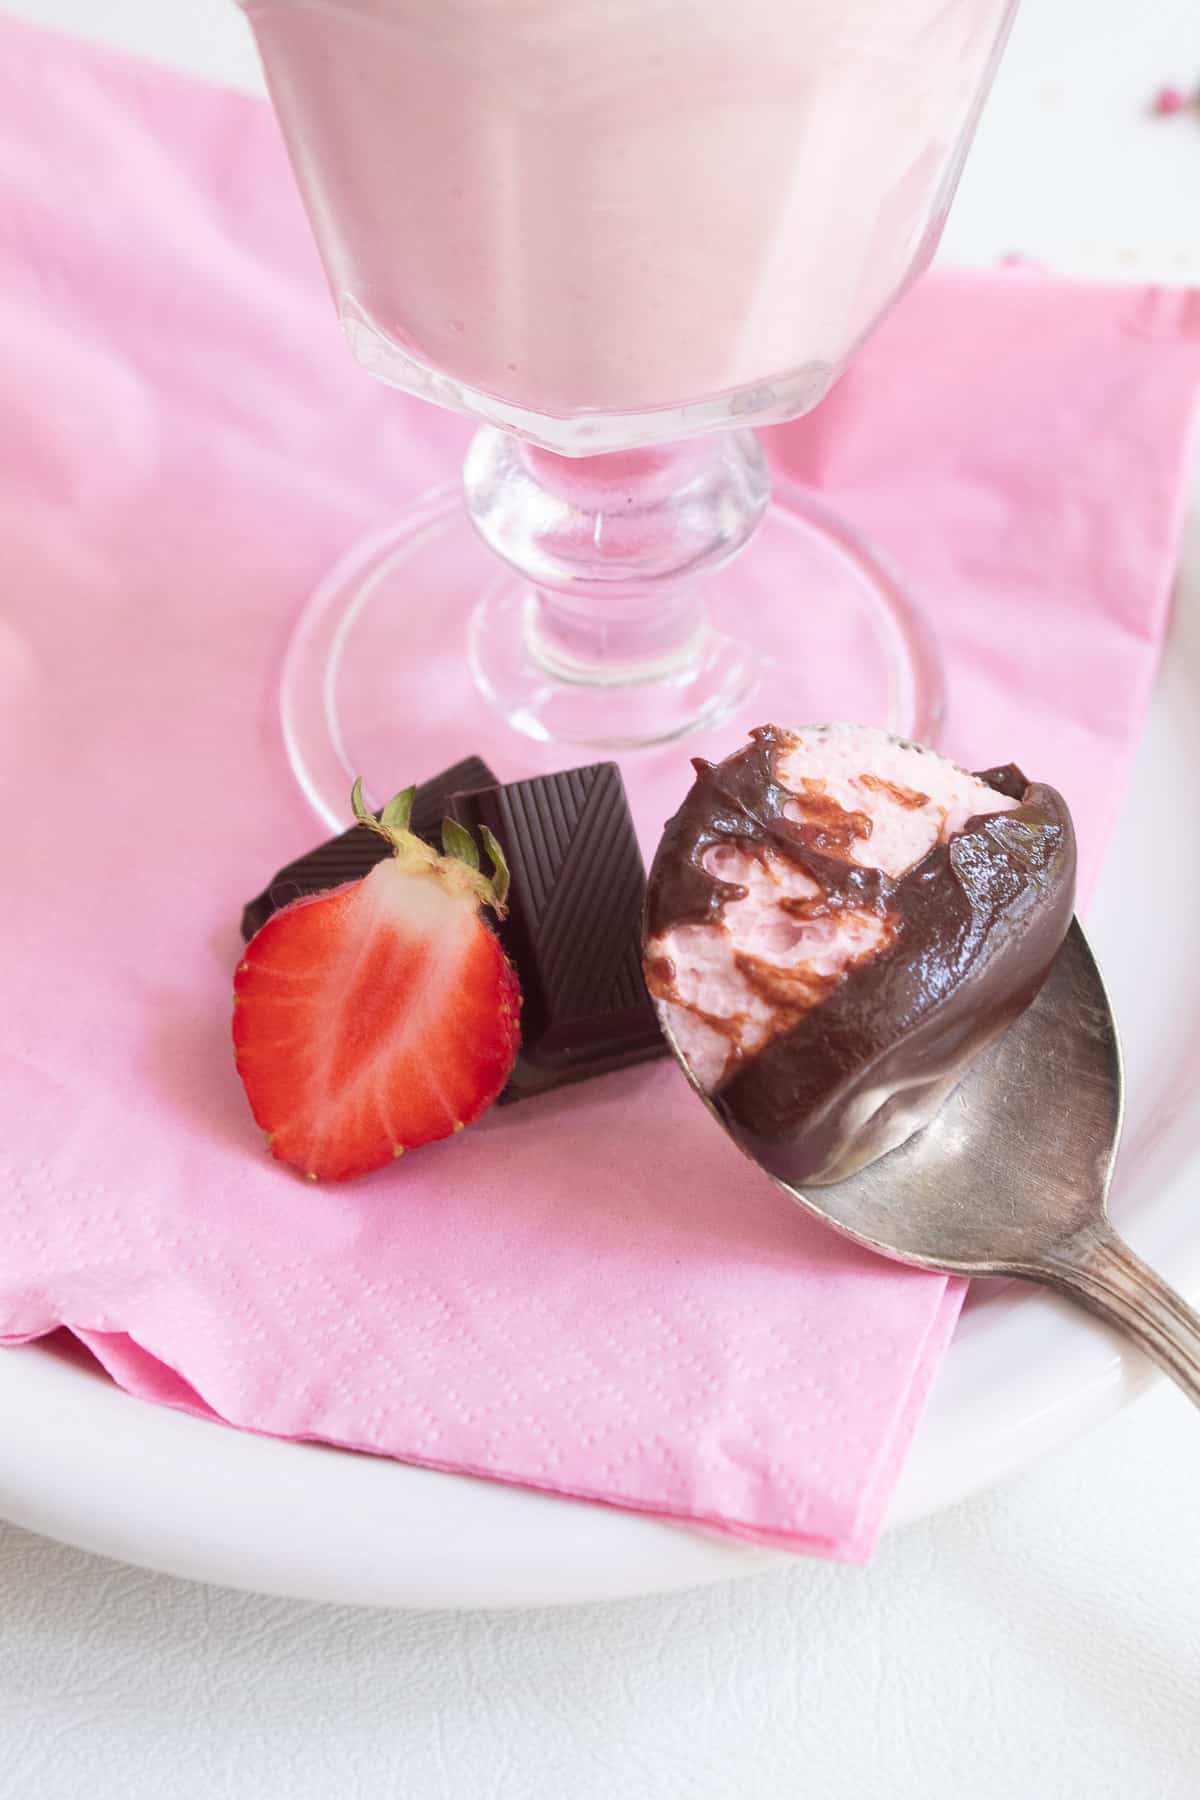 A detail image of a spoonful of the mousse with its soft chocolate layer next to a slices strawberry and pieces of dark chocolate.